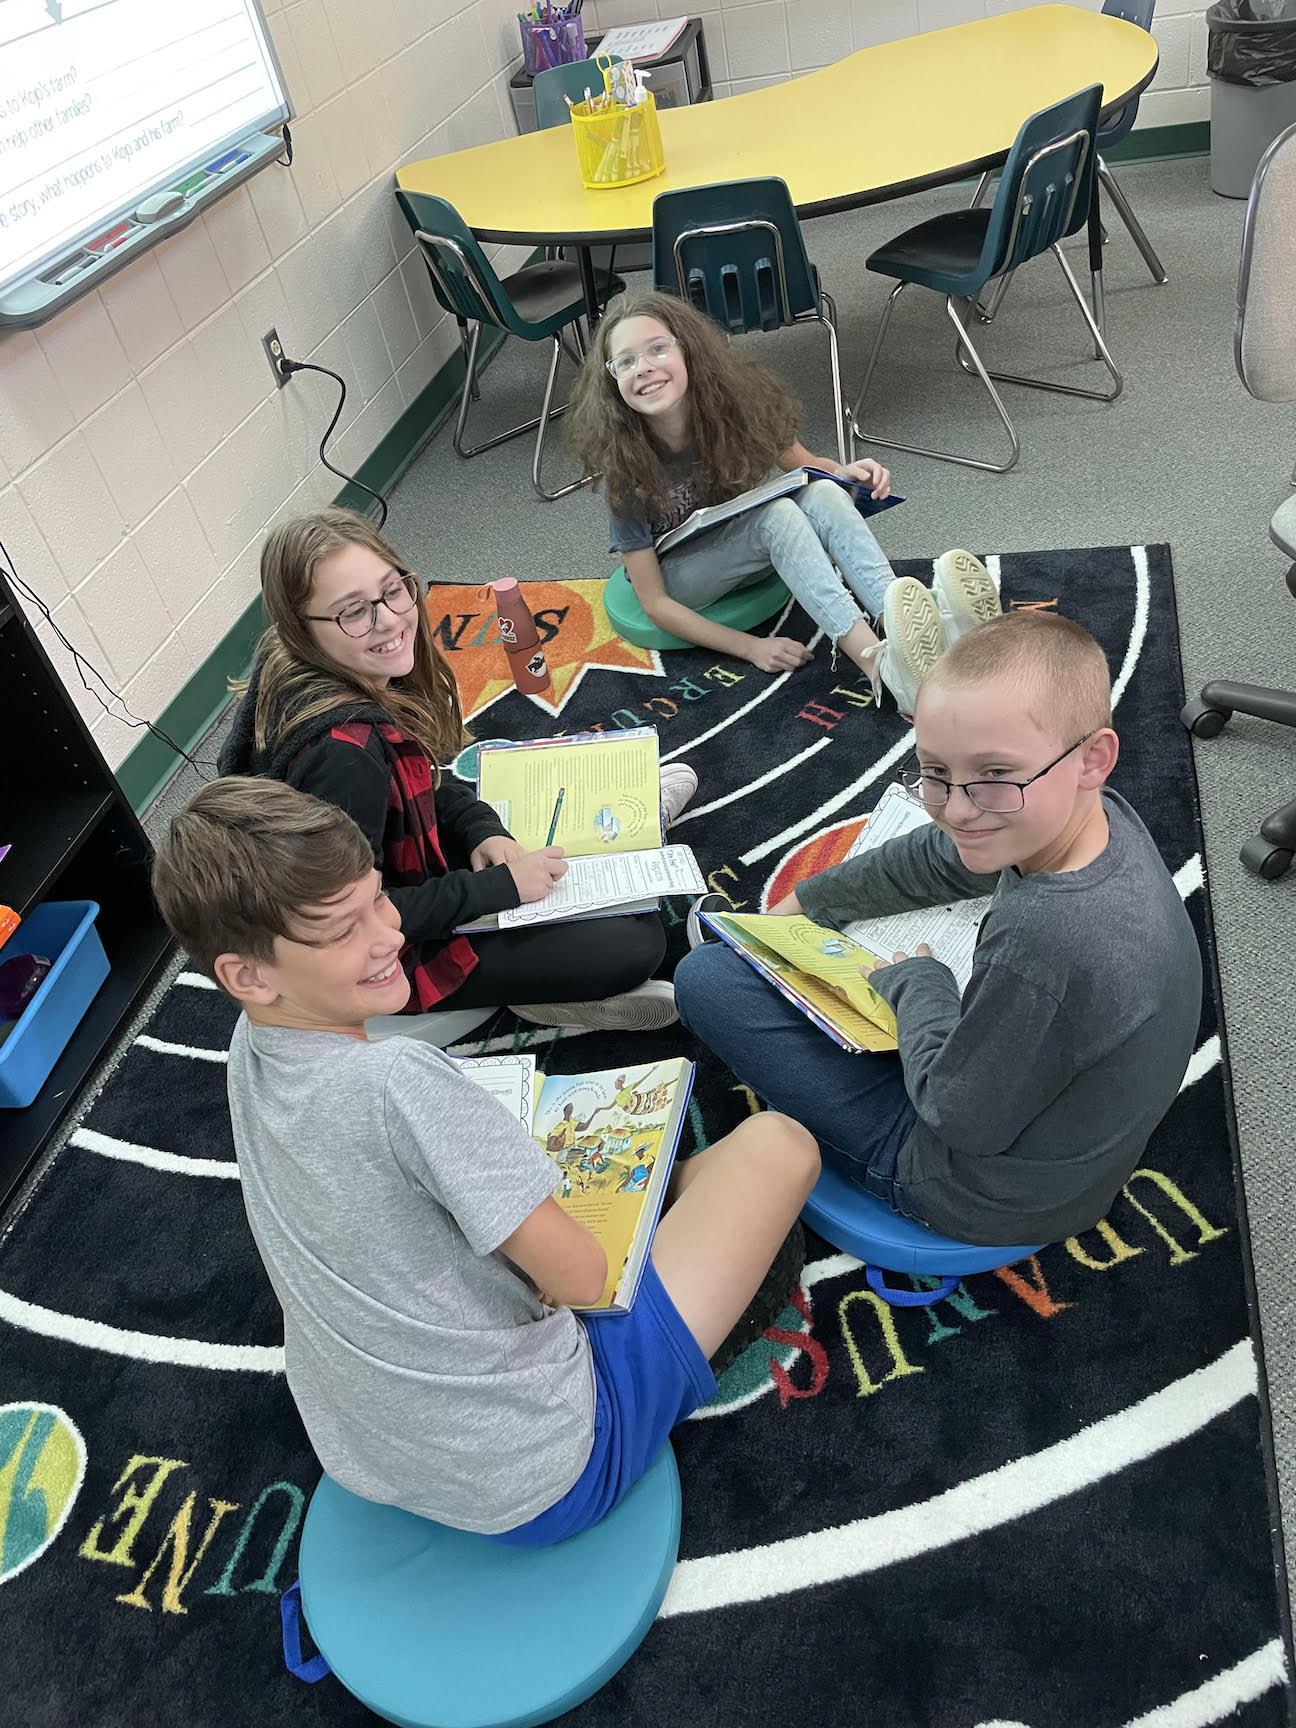 Fifth-graders Zach Sanders, London Weston, Hailey Corcoran, and Max Lenart use the cushions for a small reading group